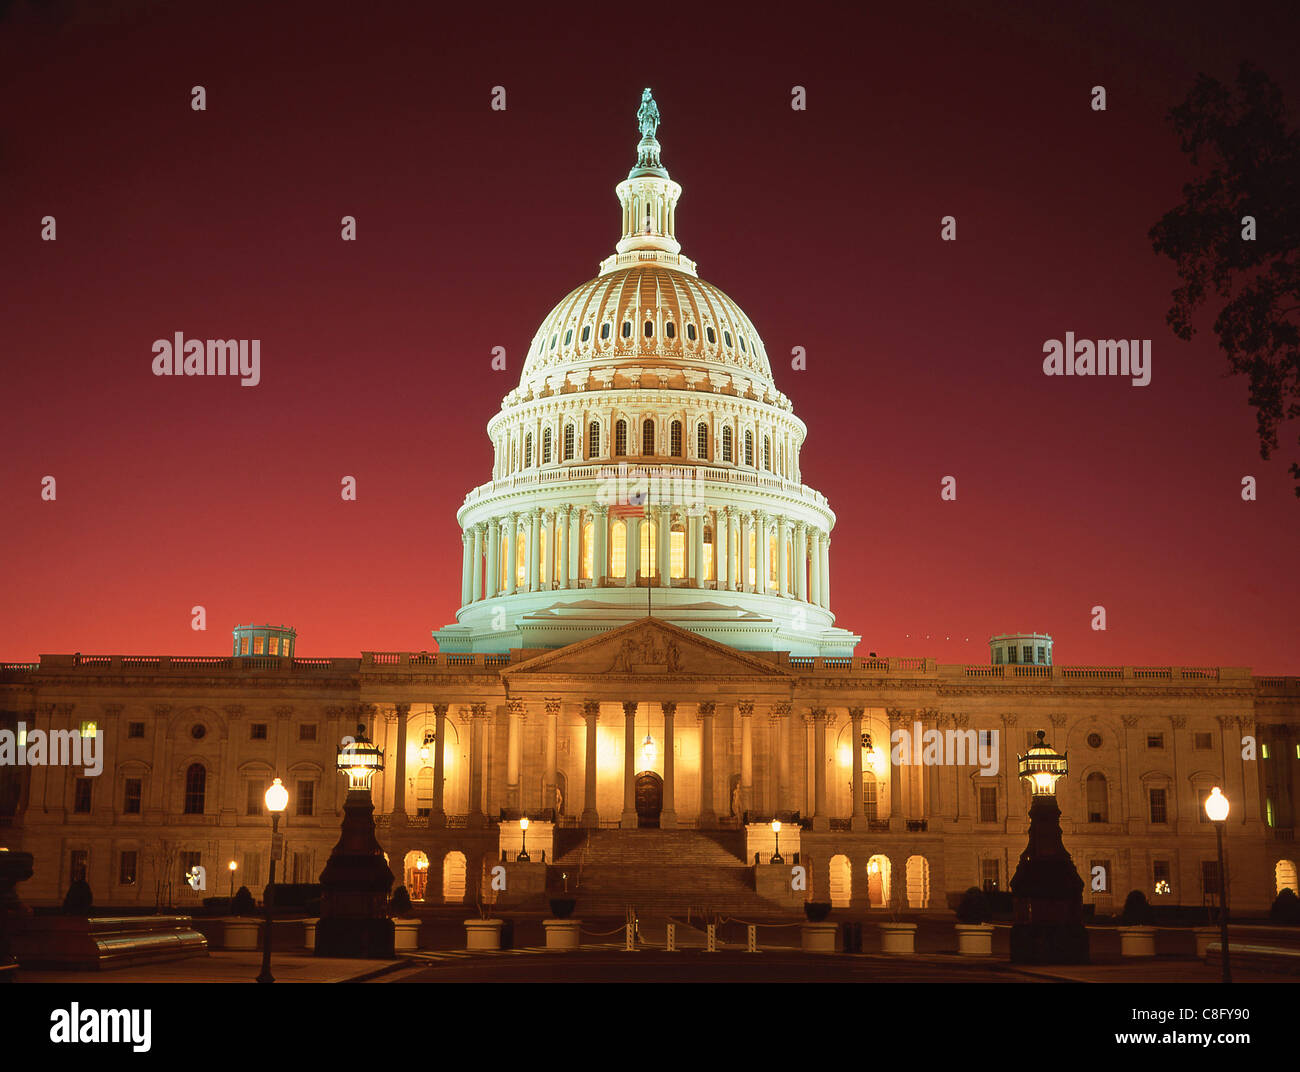 The United States Capitol building at dusk, Capitol Hill, Washington DC, United States of America Stock Photo